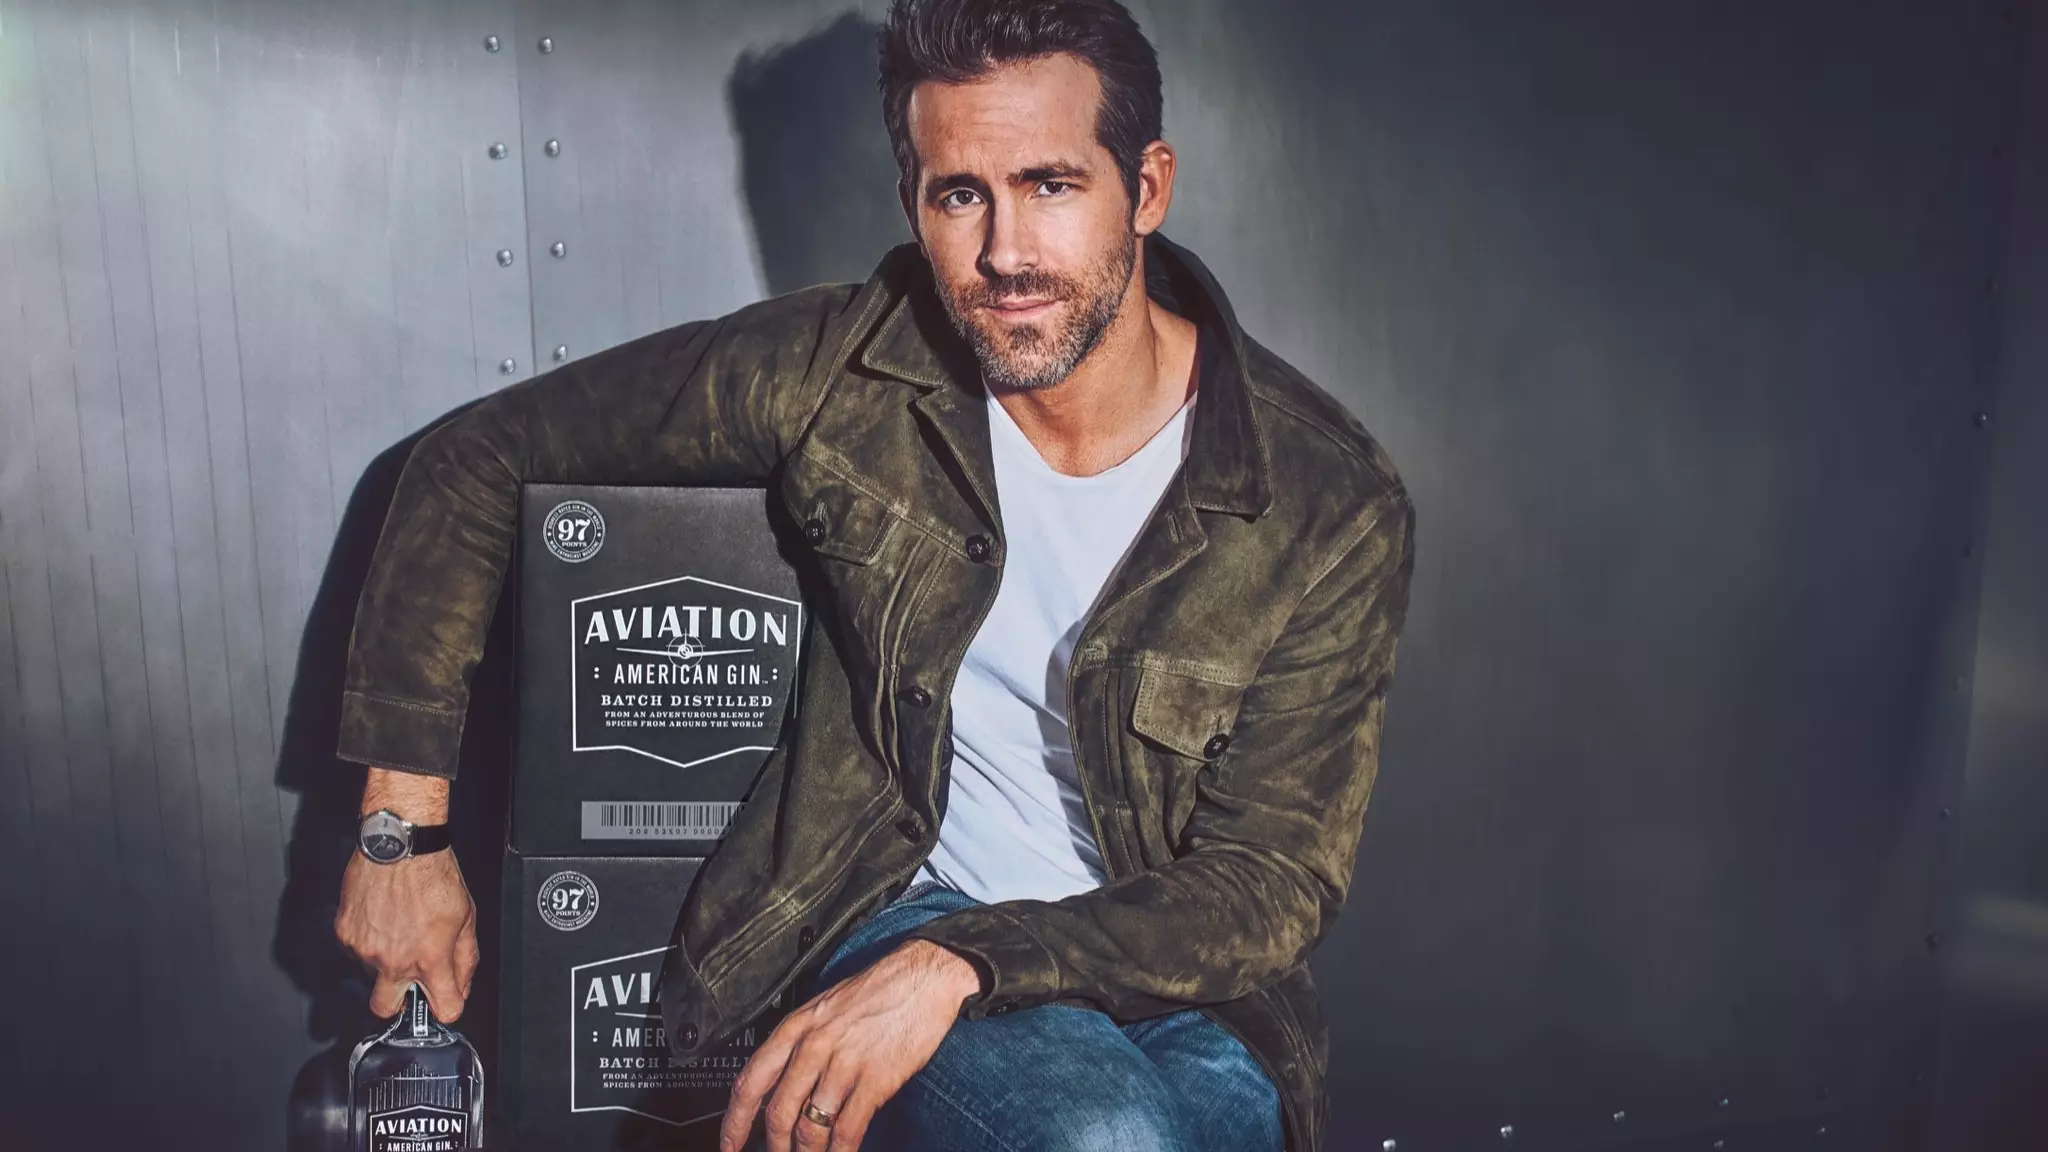 Fans Of 'Deadpool' And Booze, Rejoice: You Can Now Buy Ryan Reynolds Gin